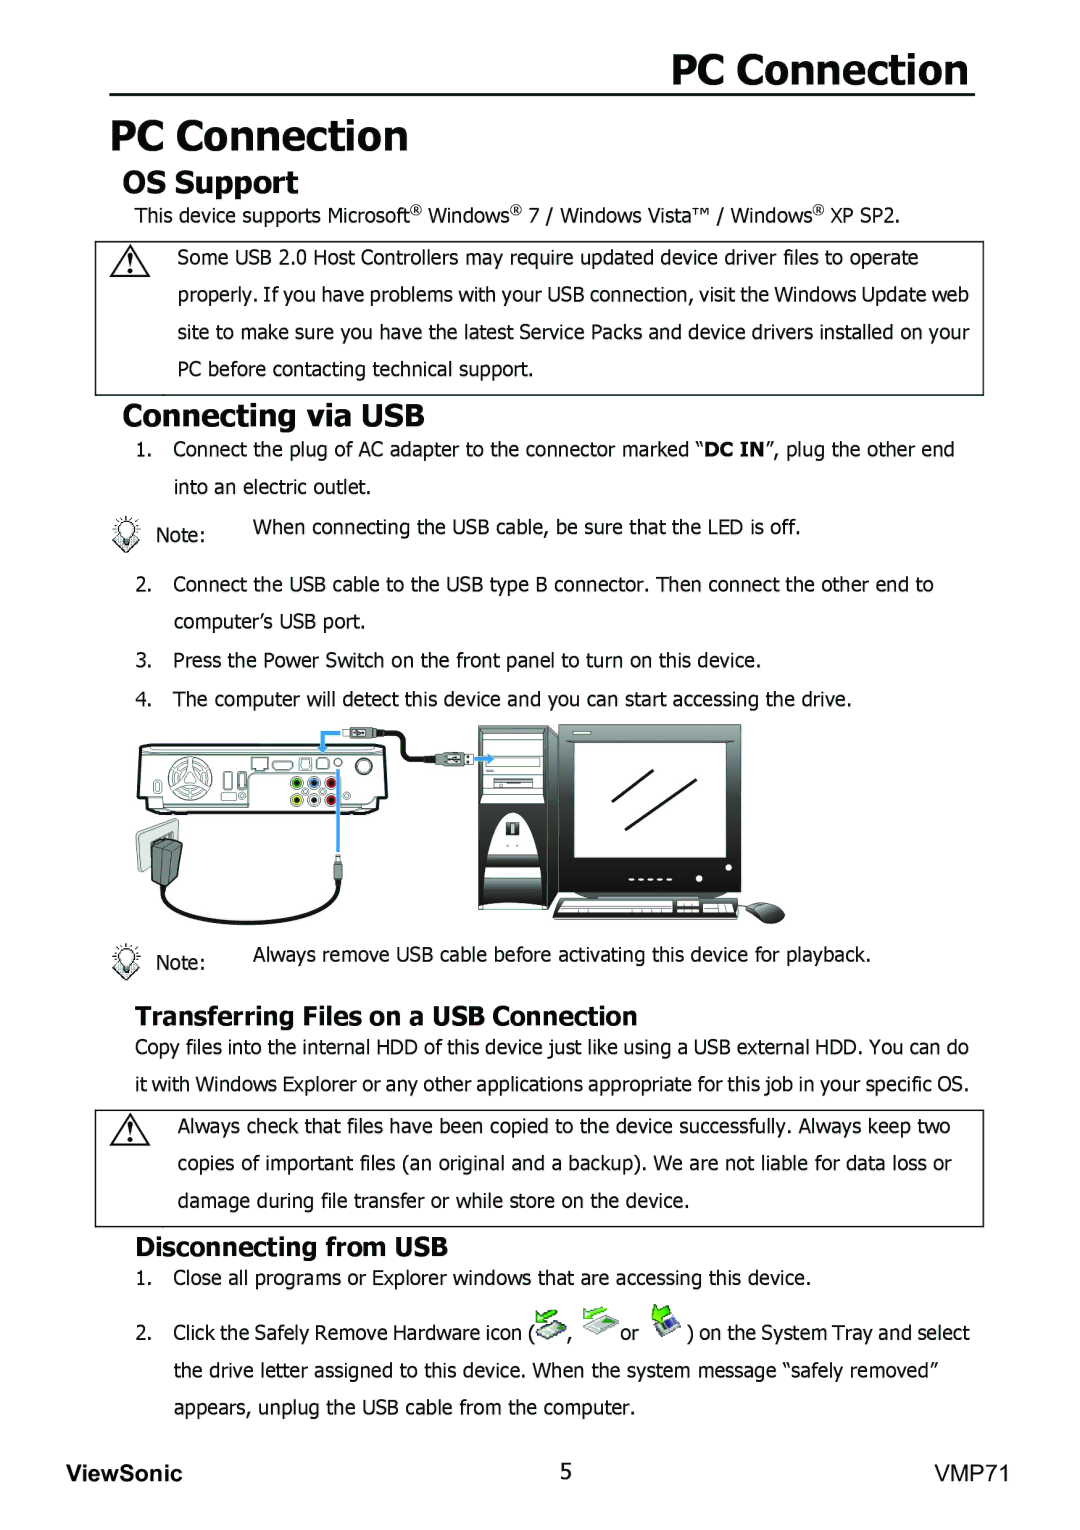 ViewSonic VMP71 manual PC Connection, OS Support, Connecting via USB, Transferring Files on a USB Connection 